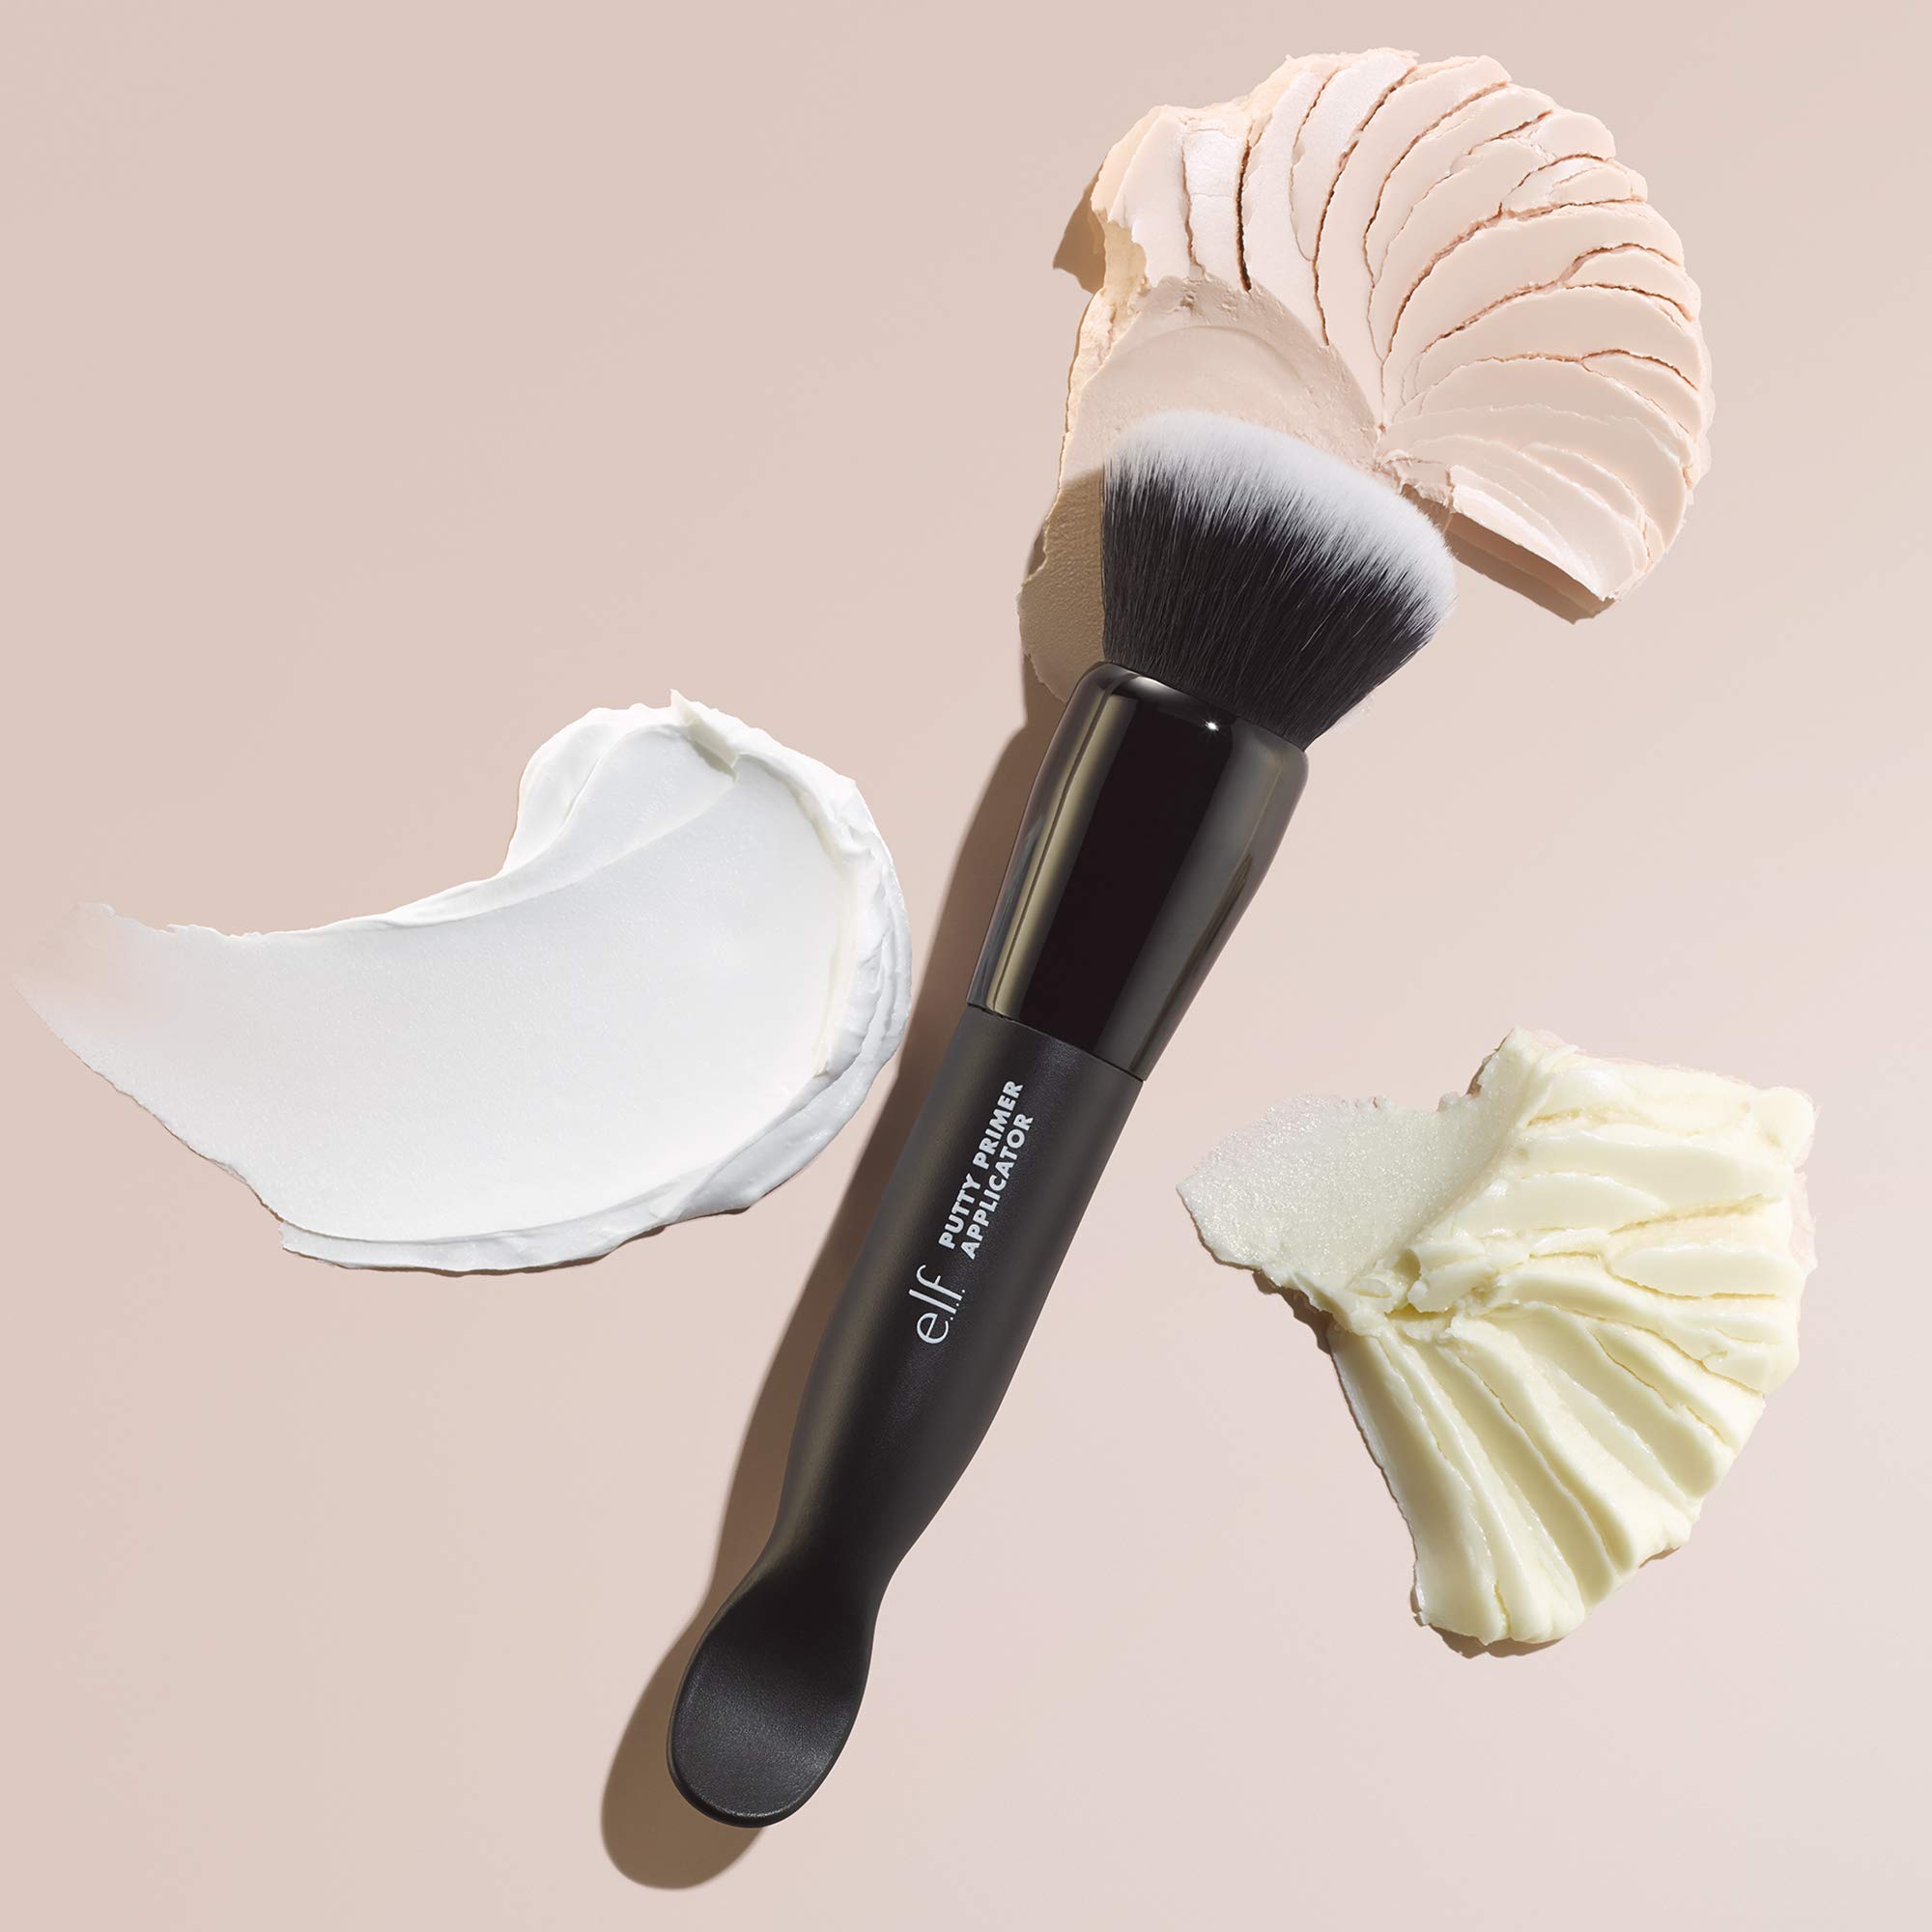 e.l.f. Putty Primer Brush and Applicator, Dual-Ended Makeup Tool & Face Brush, Scoop & Blend for Flawless Sanitary Application